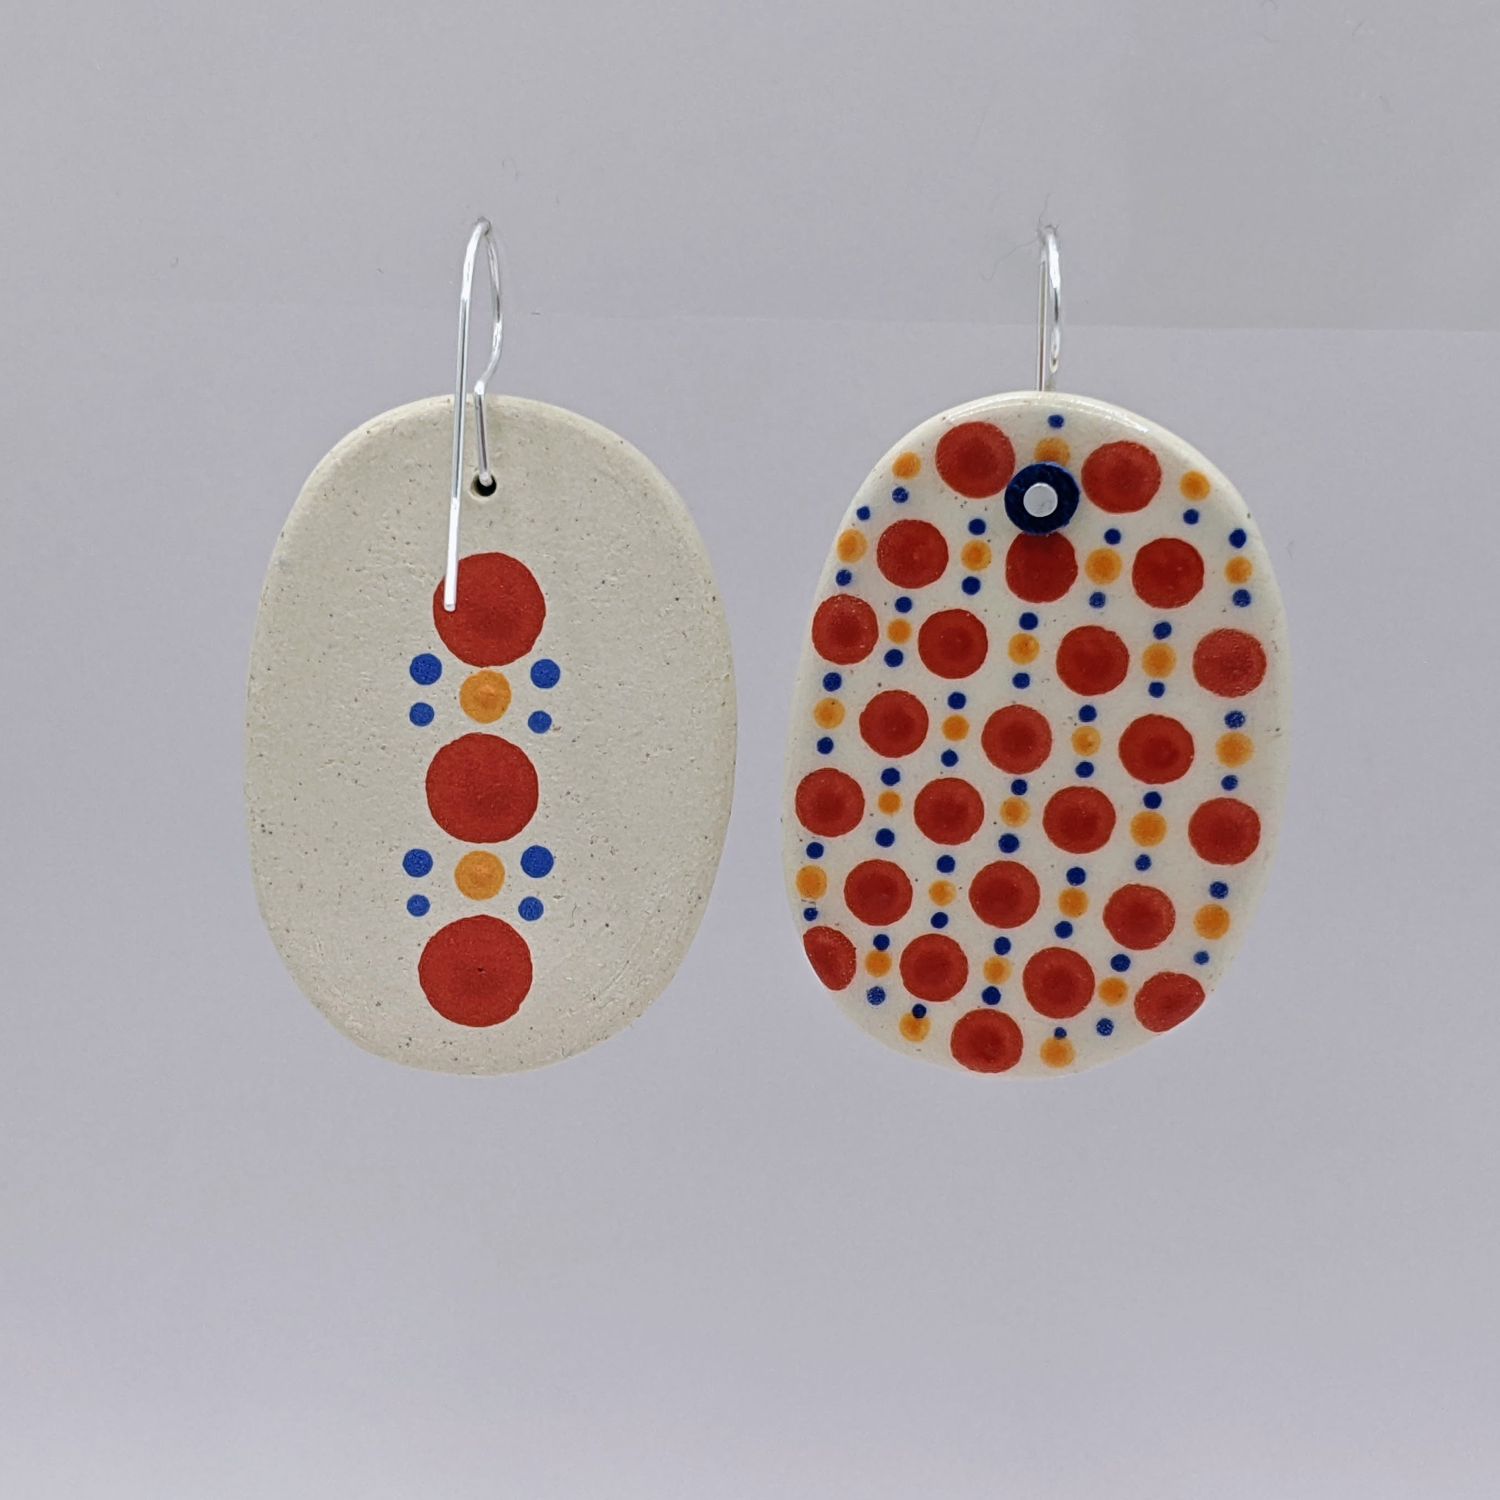 Here and Here: Red Dotted Ceramic Disc Earrings Product Image 2 of 3